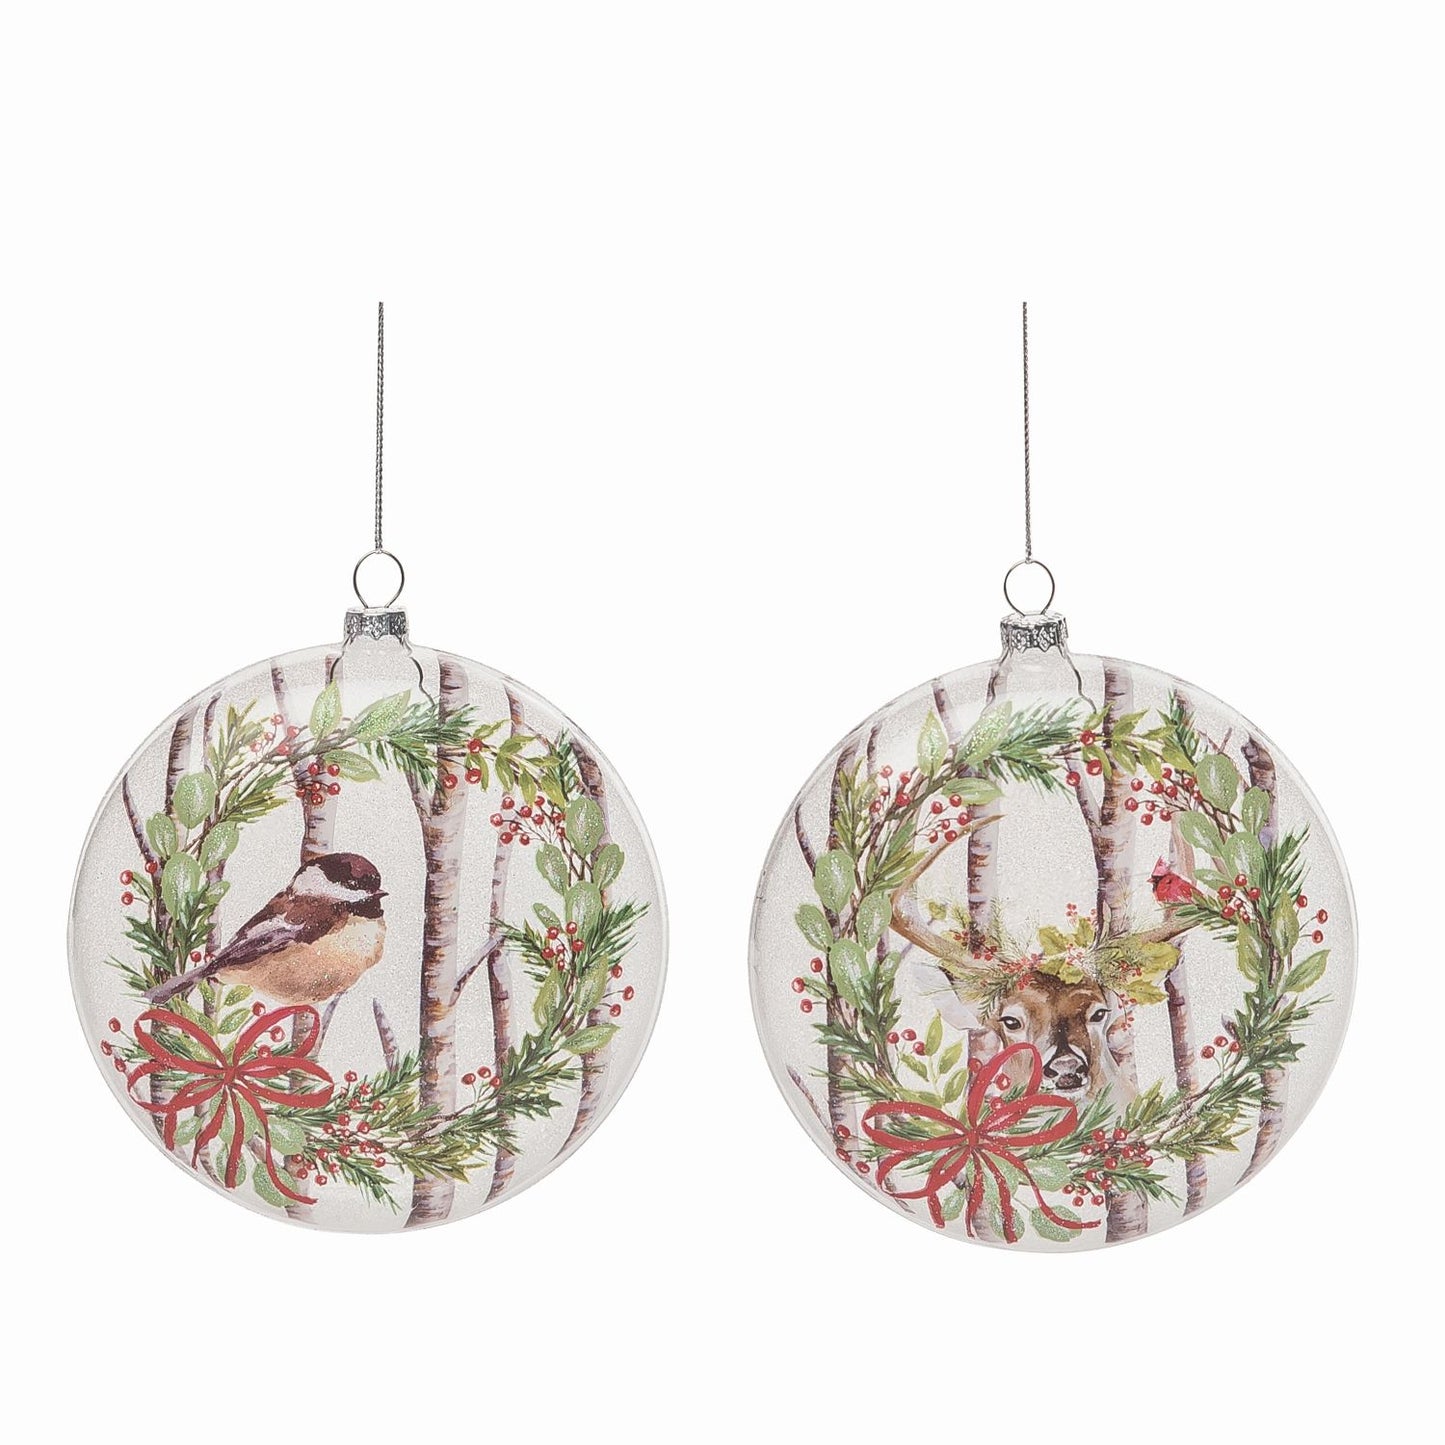 Transpac Glass Painted Birch Forest Ornament, Set Of 2, Assortment